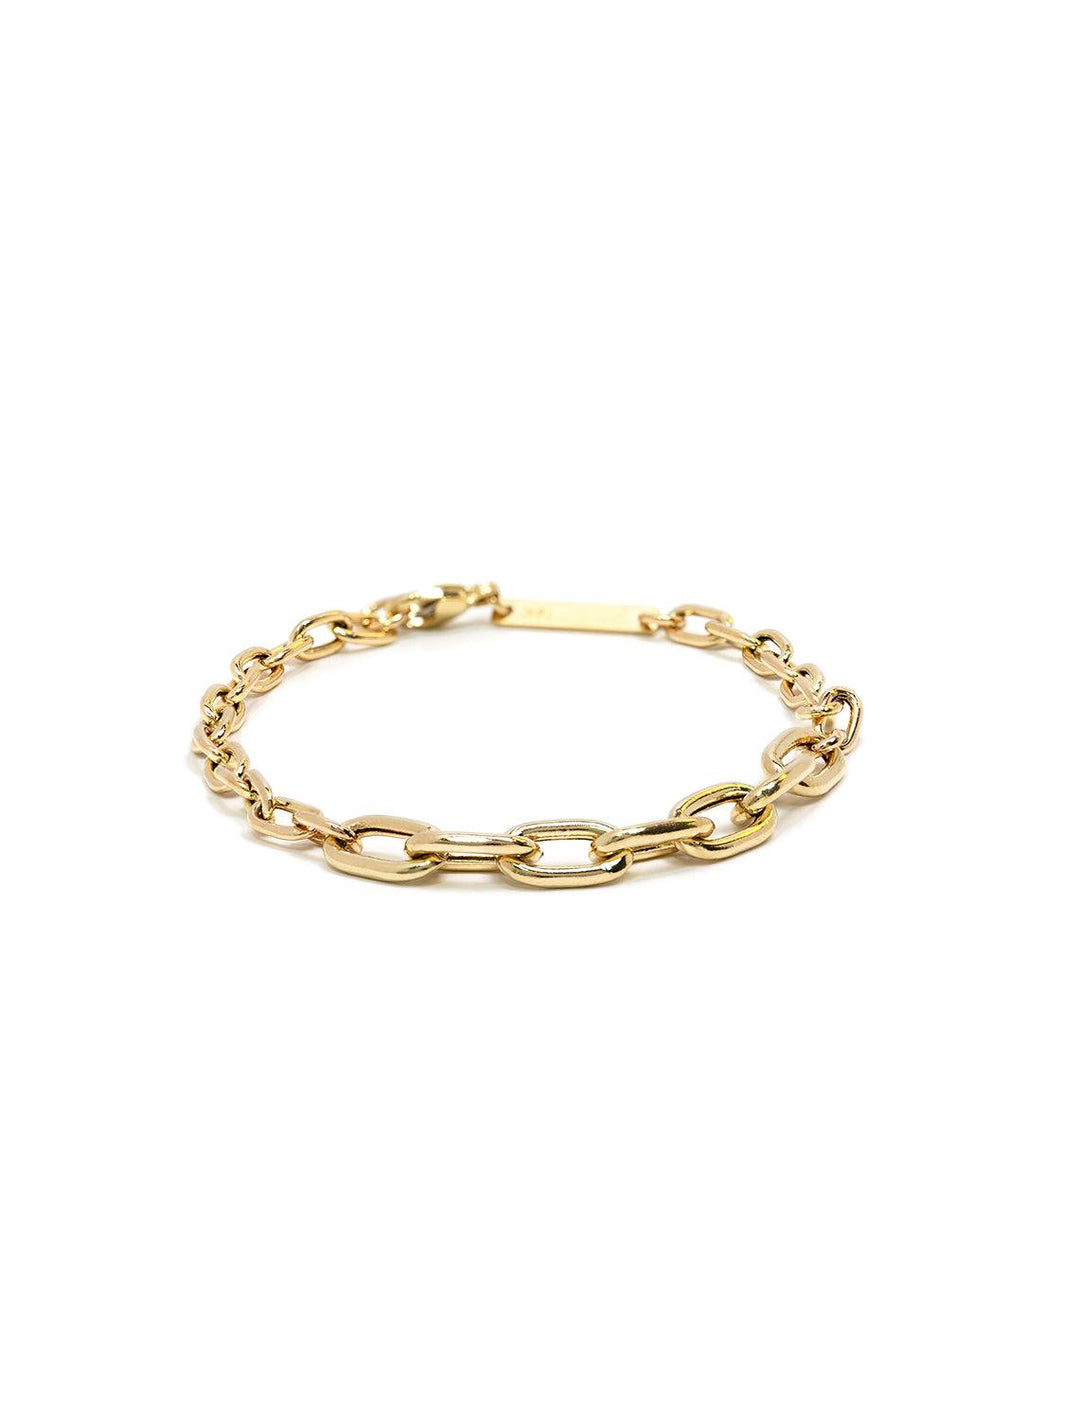 Front view of Zoe Chicco's 14k mixed medium and xl chain link bracelet | 6.5"